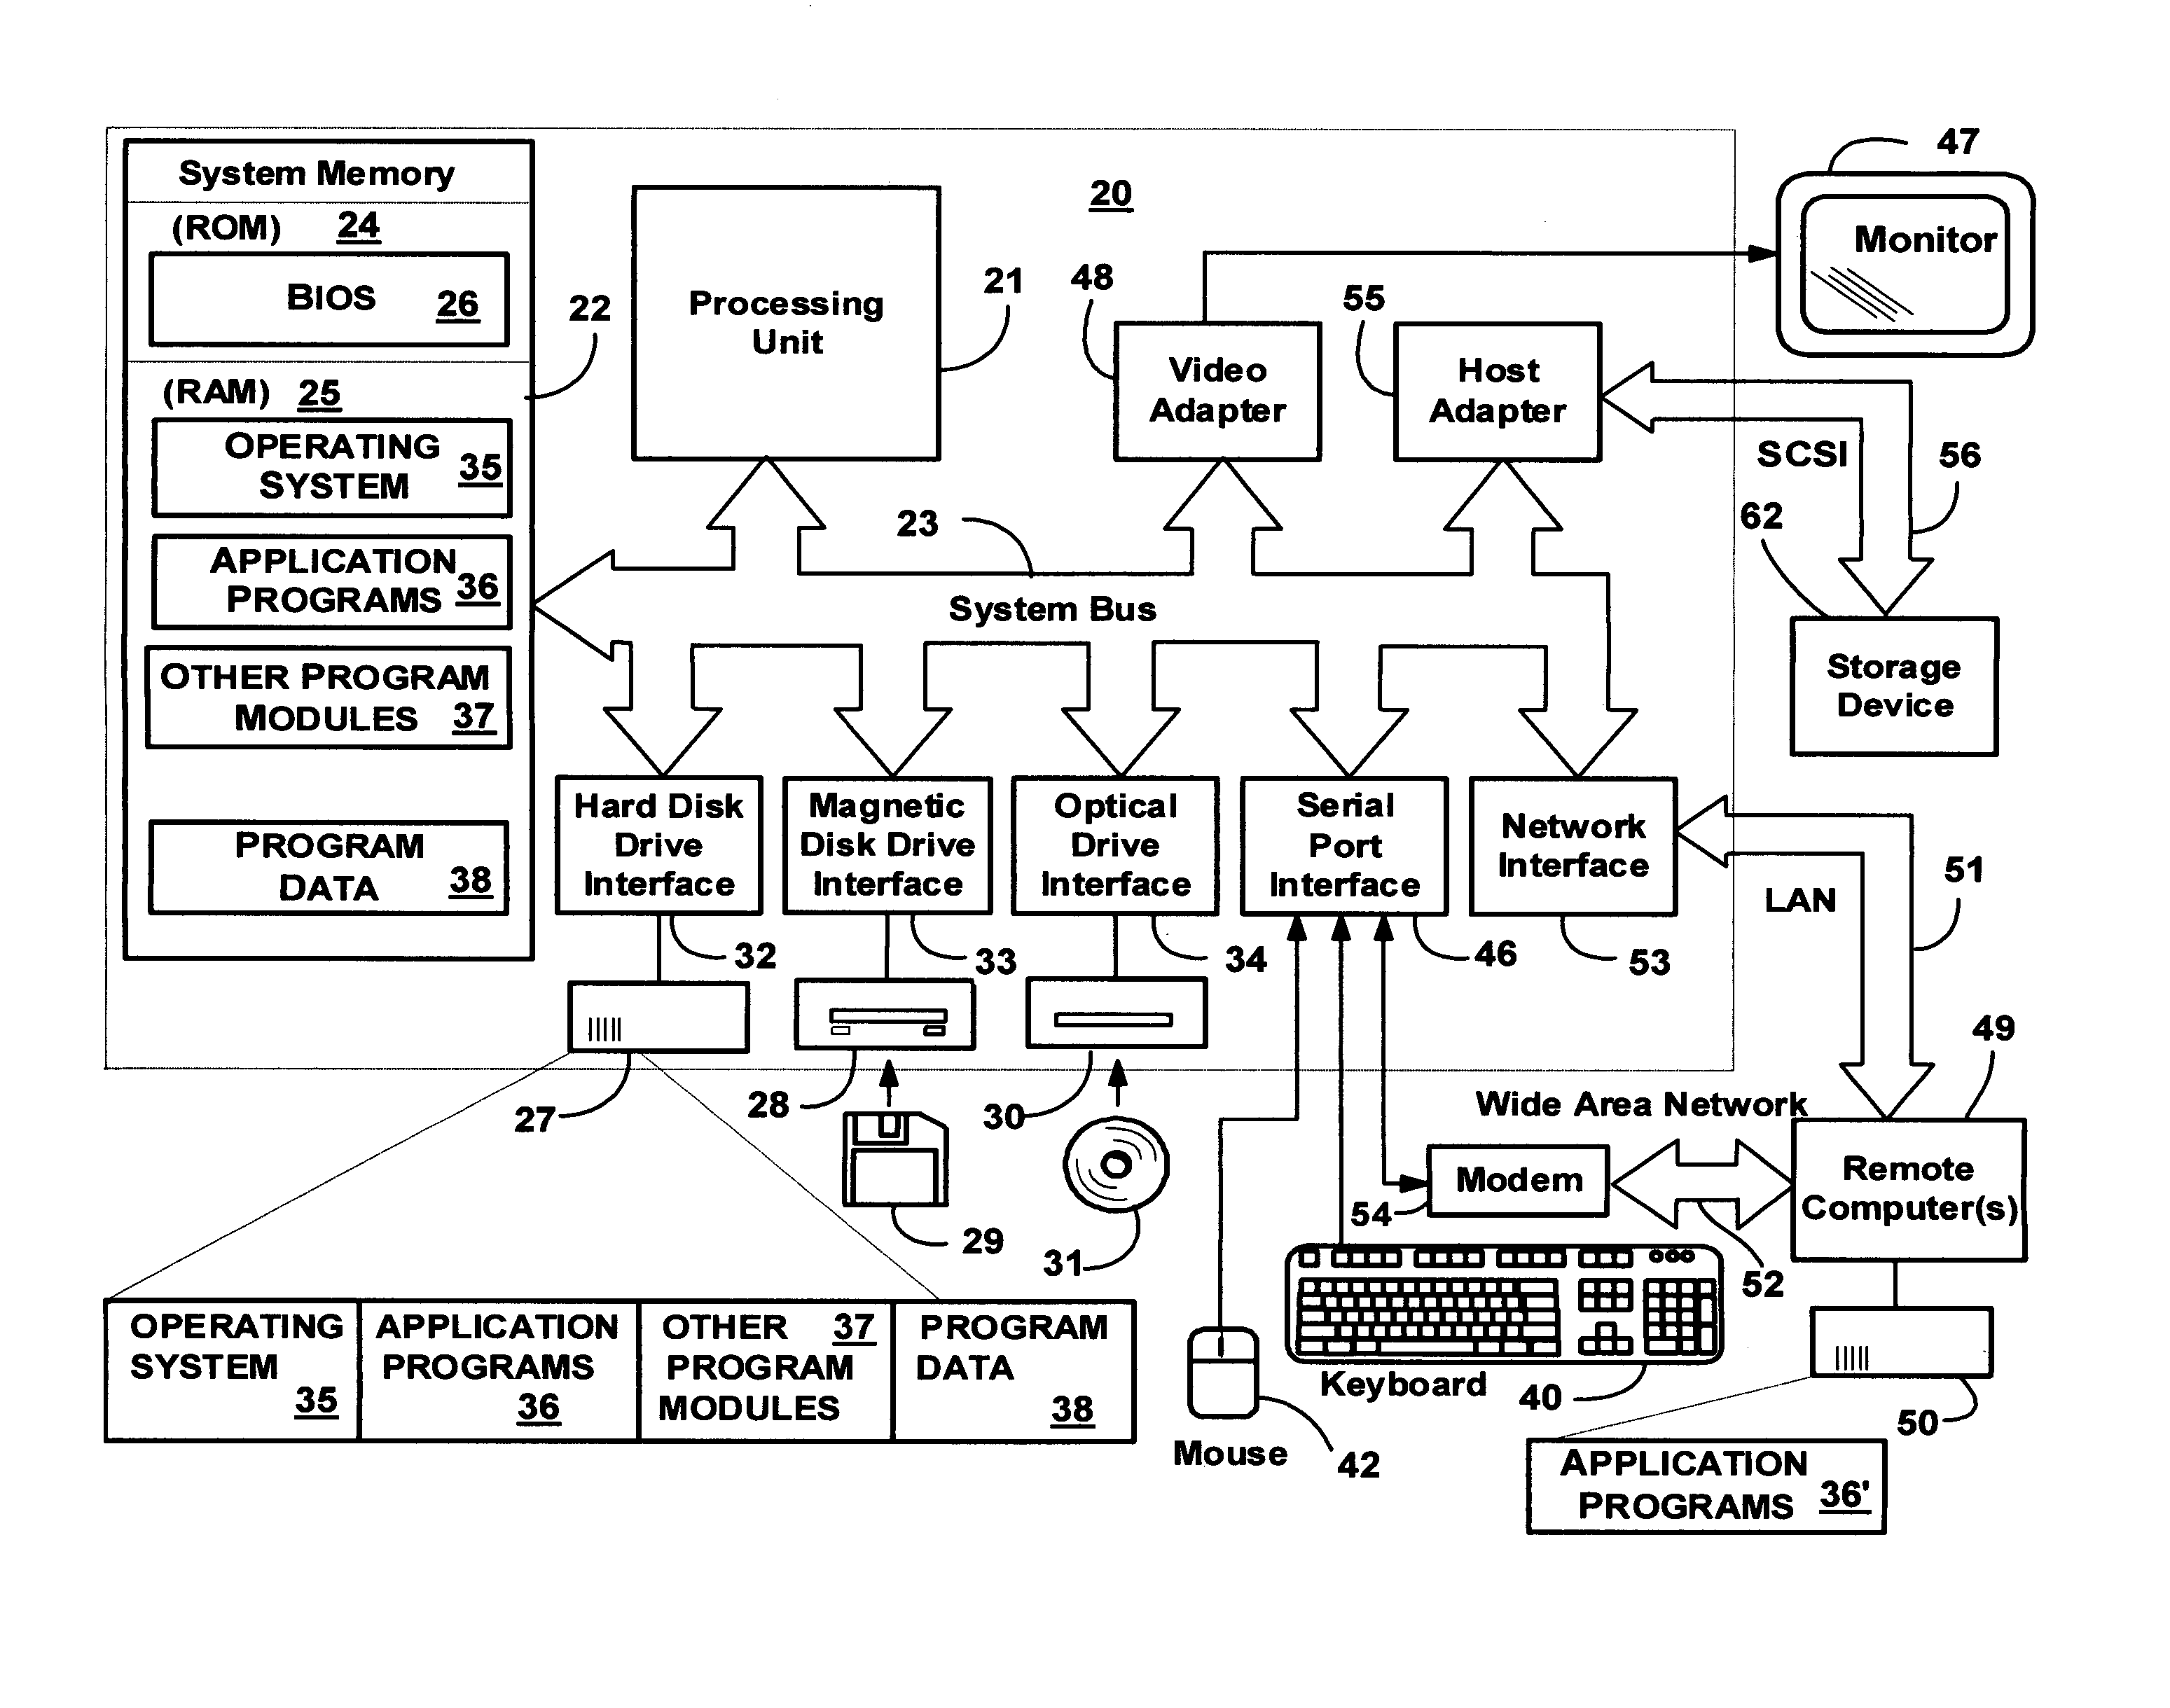 Method and system for managing lifecycles of deployed applications